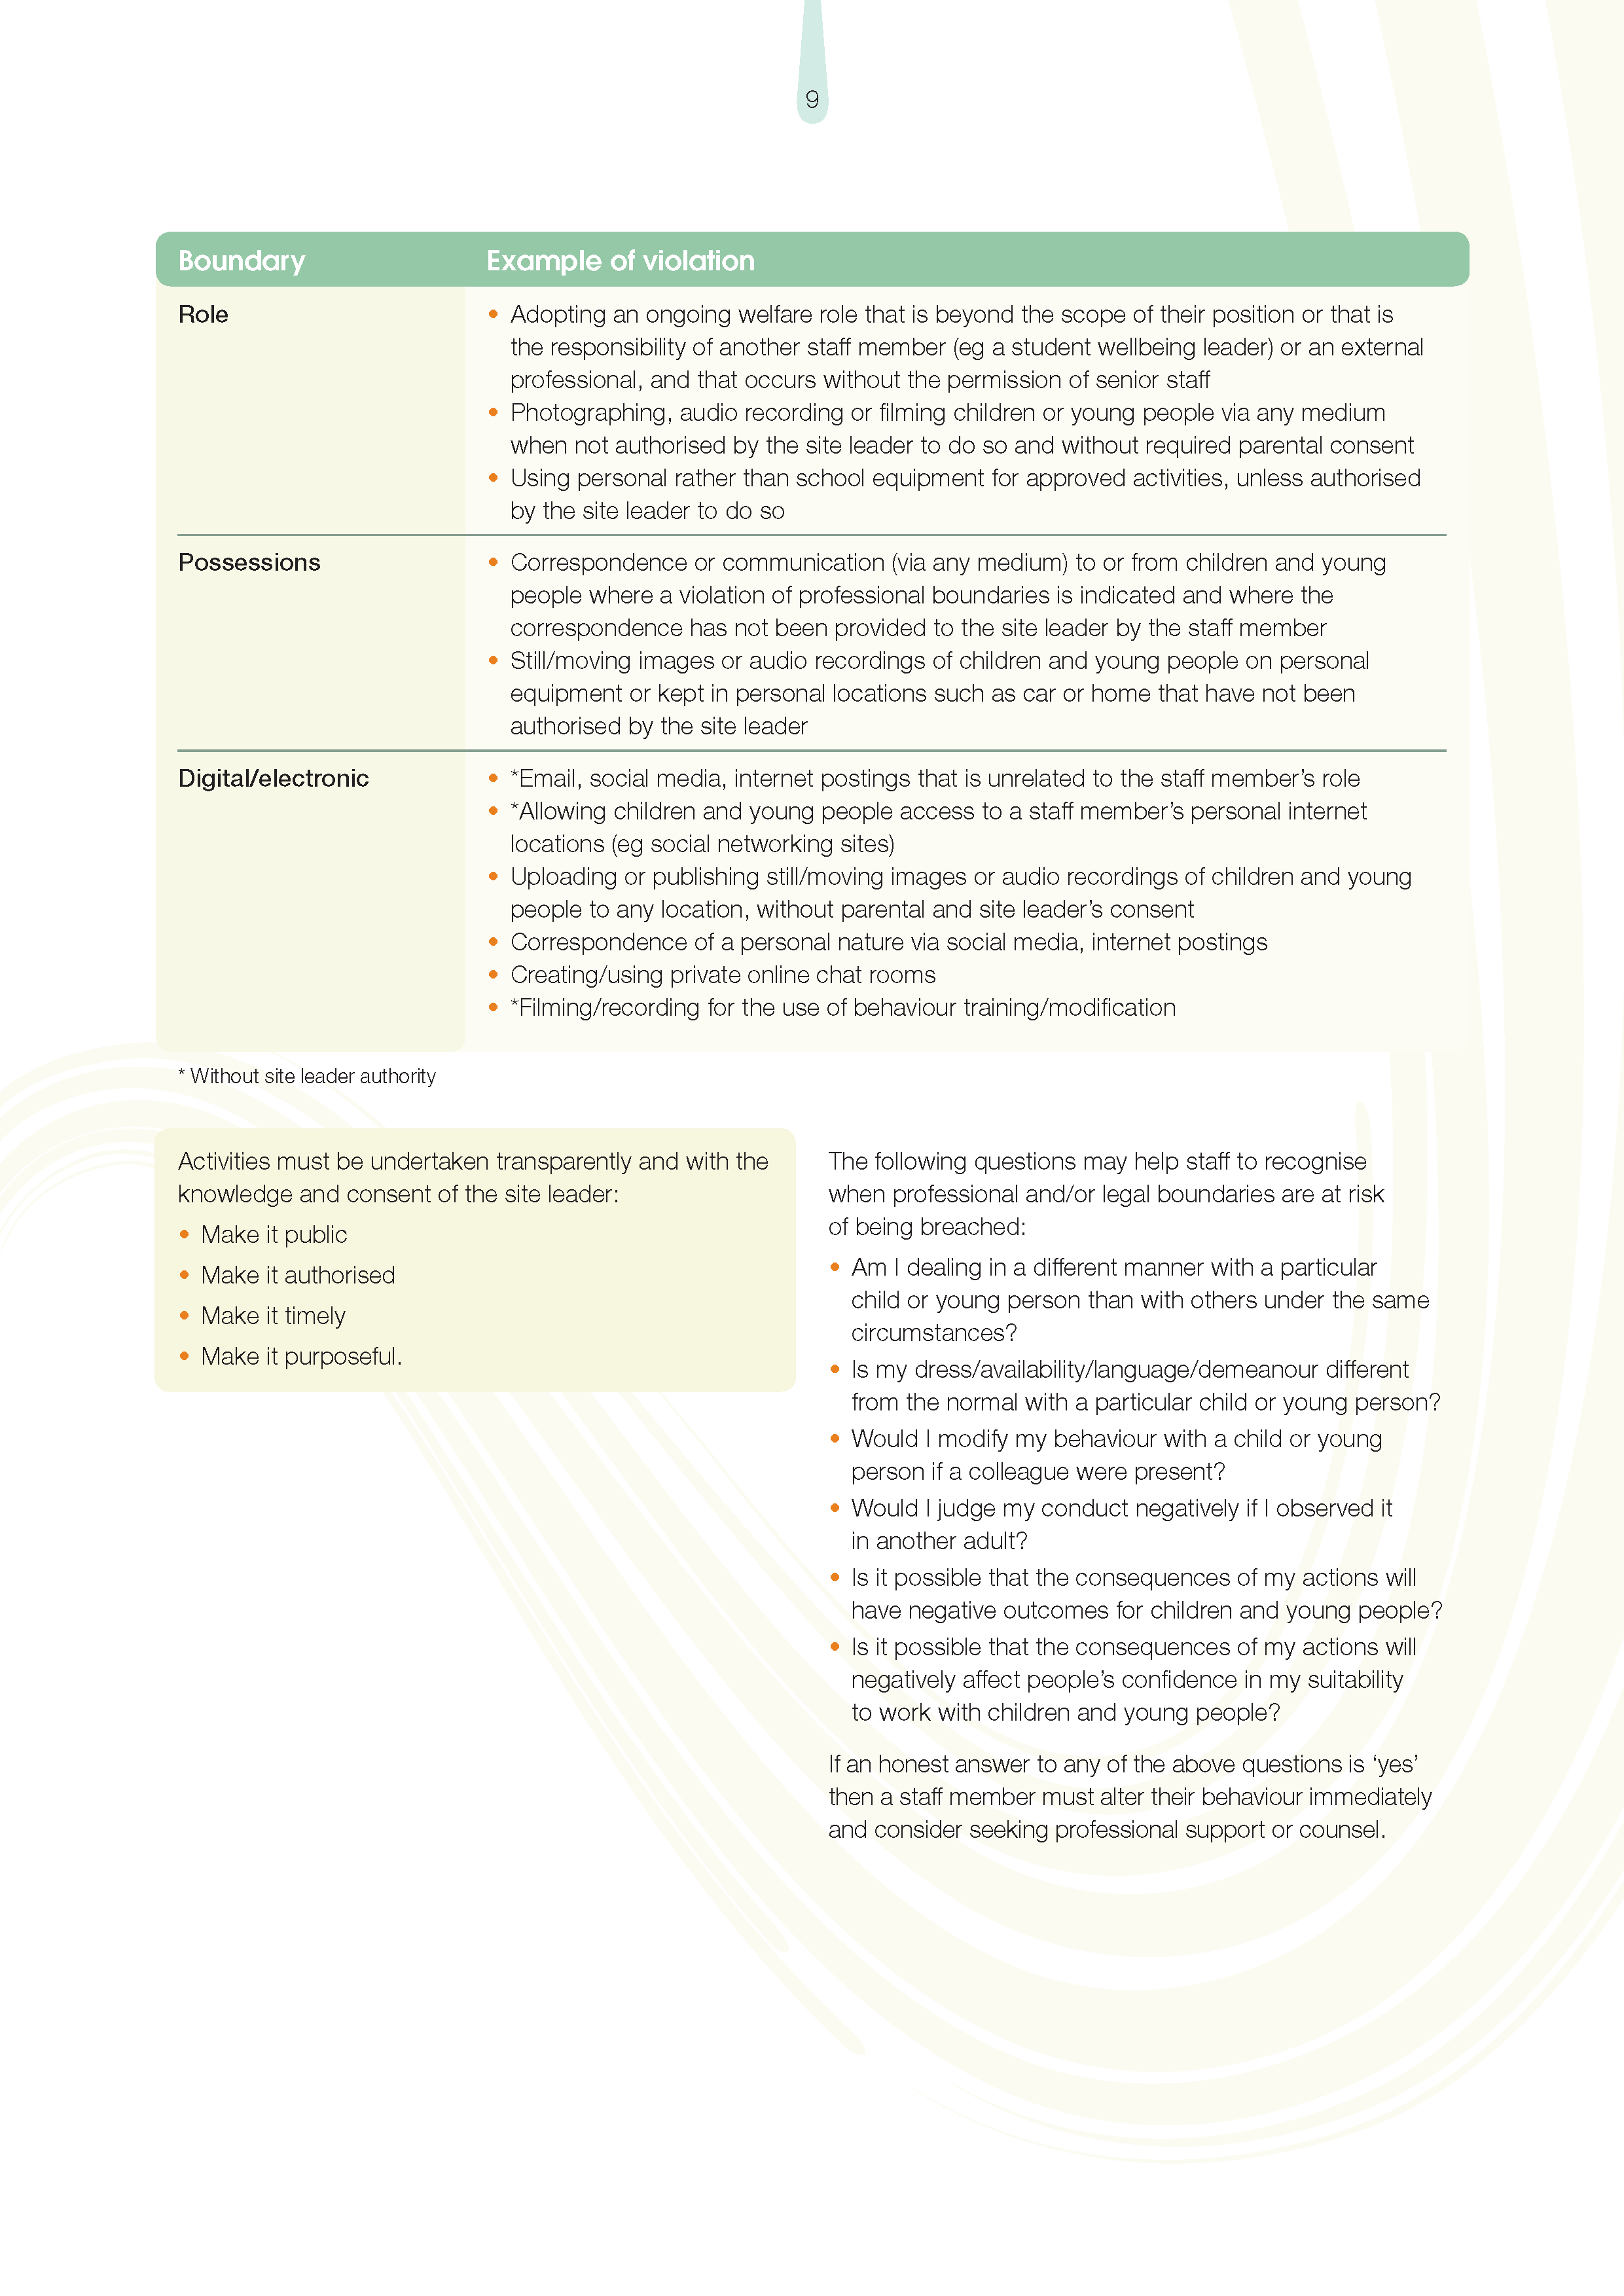 protective_practices_for_staff_in_their_interactions_with_children_and_young_people 2019_Page_12.png